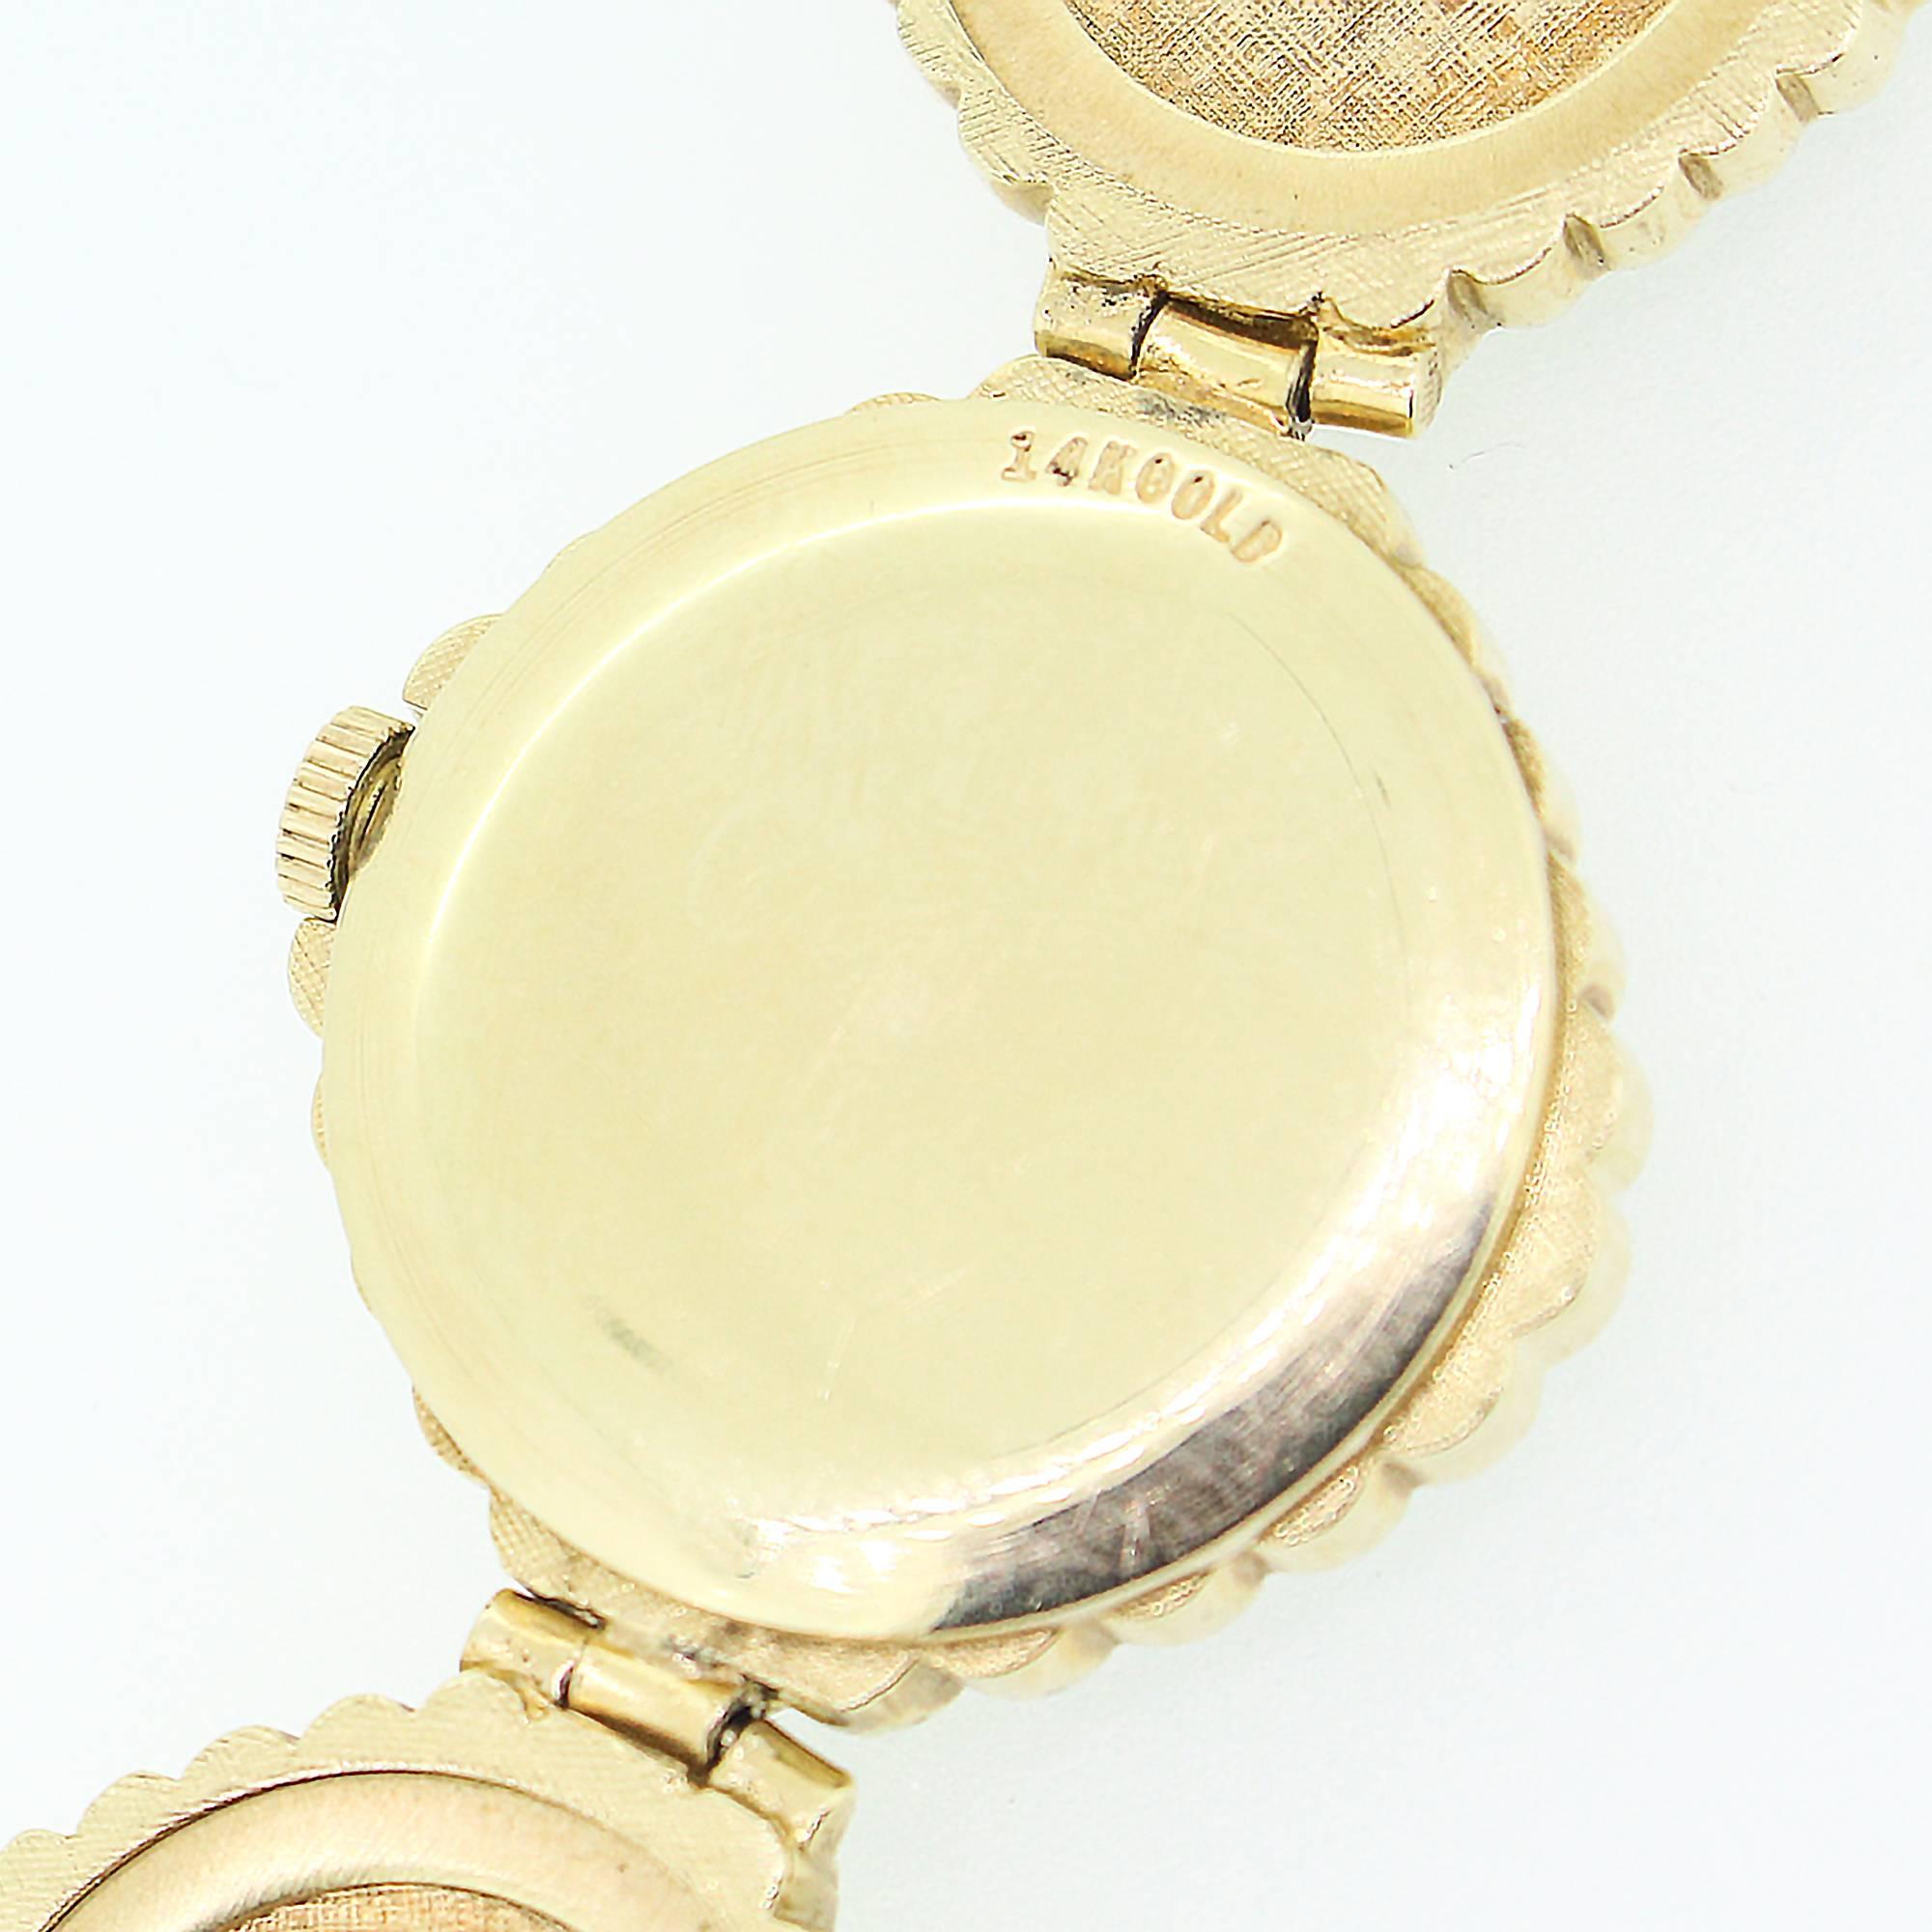 This vintage wrist watch features 8 links and a dial created with a very unique opal mosaic design. The watch is 14k gold with a serial number indicating it was created in 1972. The watch includes a 17 jewel manual wind movement.